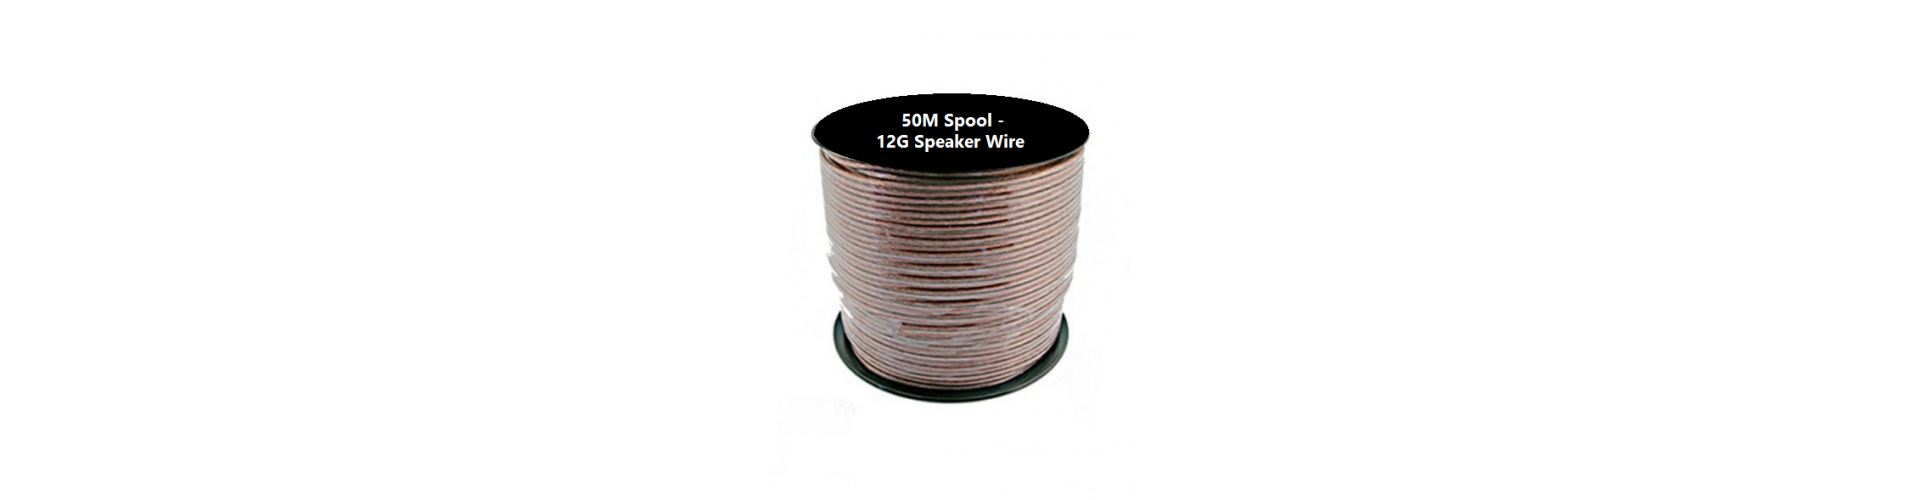 Bulk Wires | Cables by the Spool